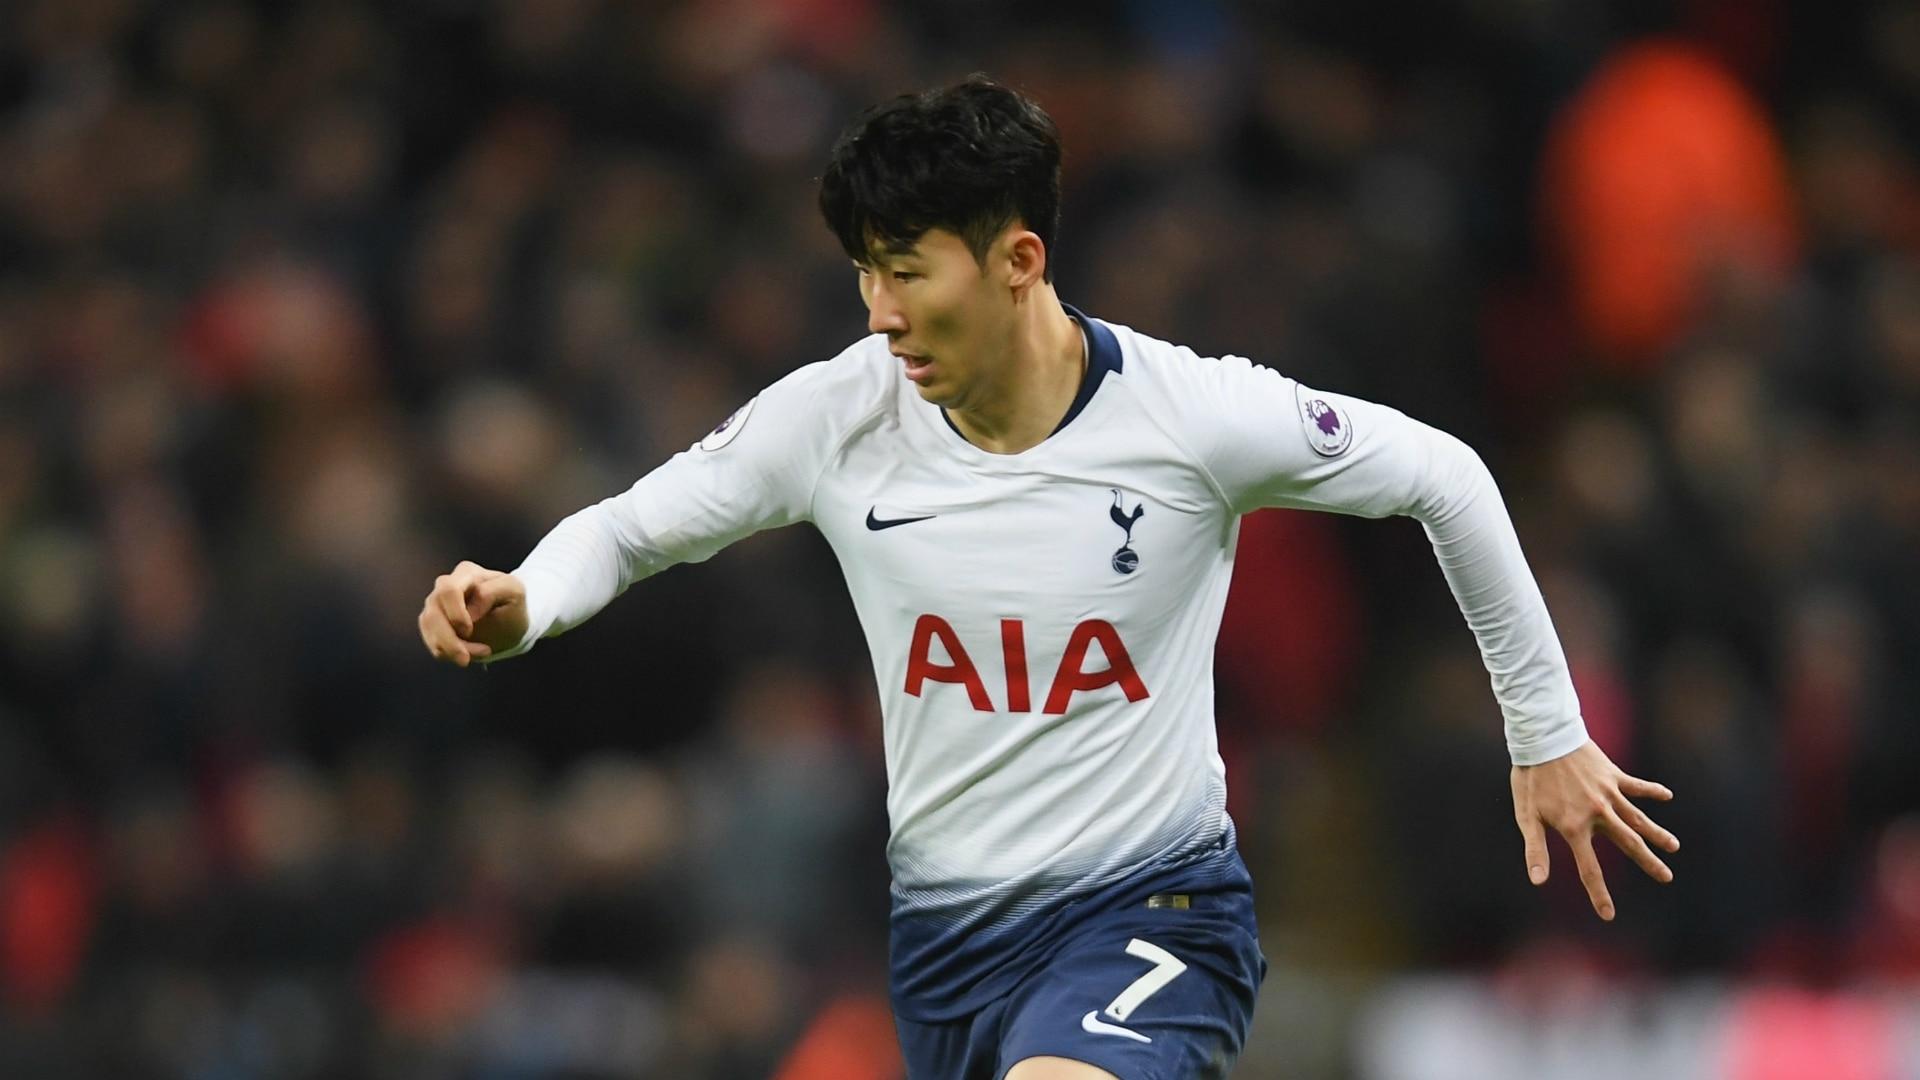 Tottenham investigating reports of racism aimed at Son. SBS Your